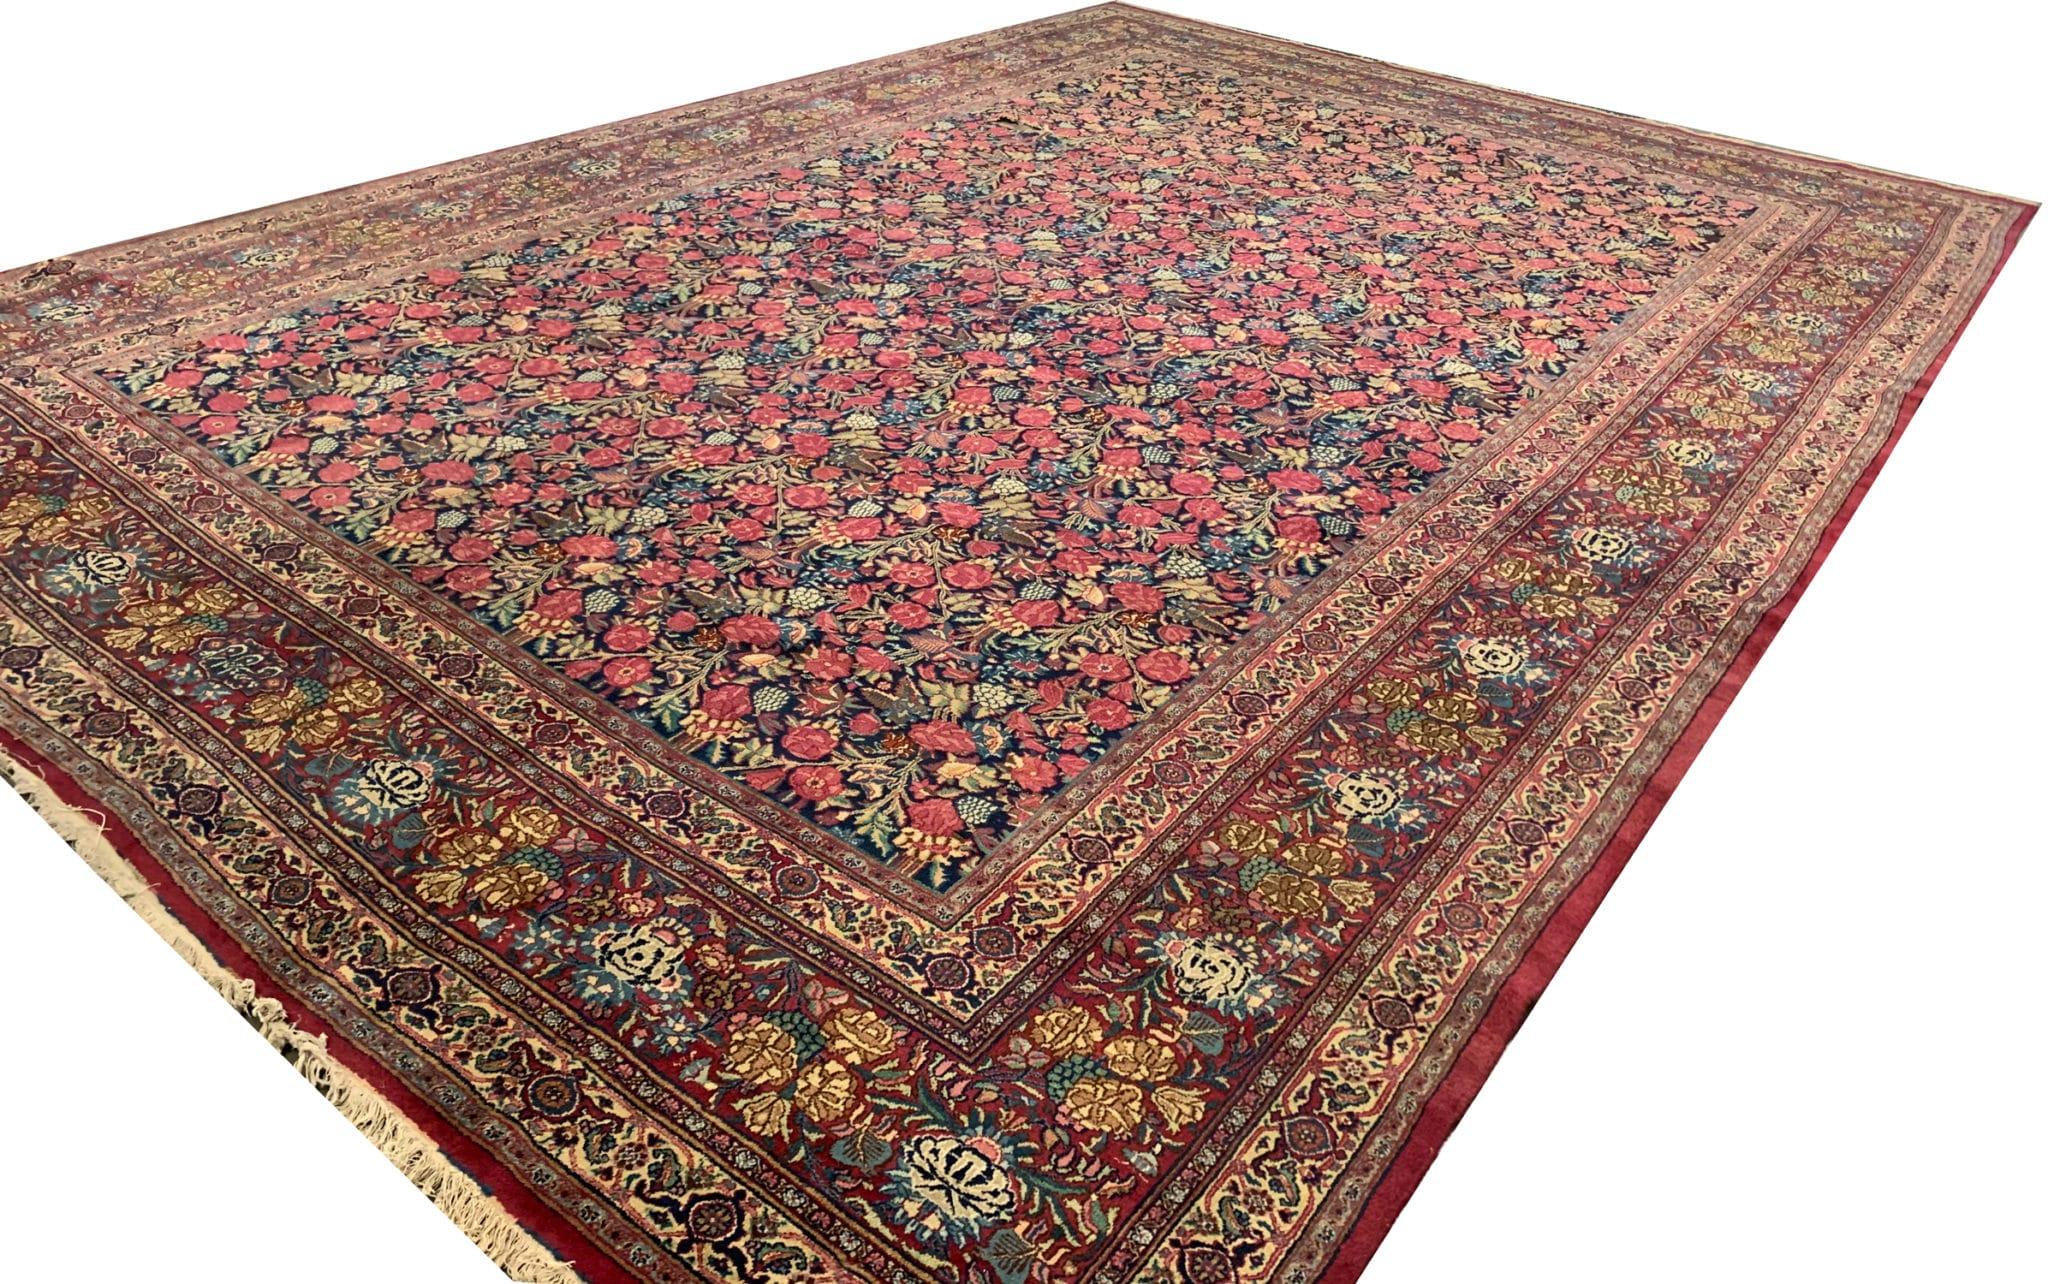 The stunning oversize antique rug, boasting an intricate floral all over design that adds a timeless charm to any space. Hand-knotted with precision and care, this vintage rug embodies the artistry of traditional craftsmanship, ensuring both